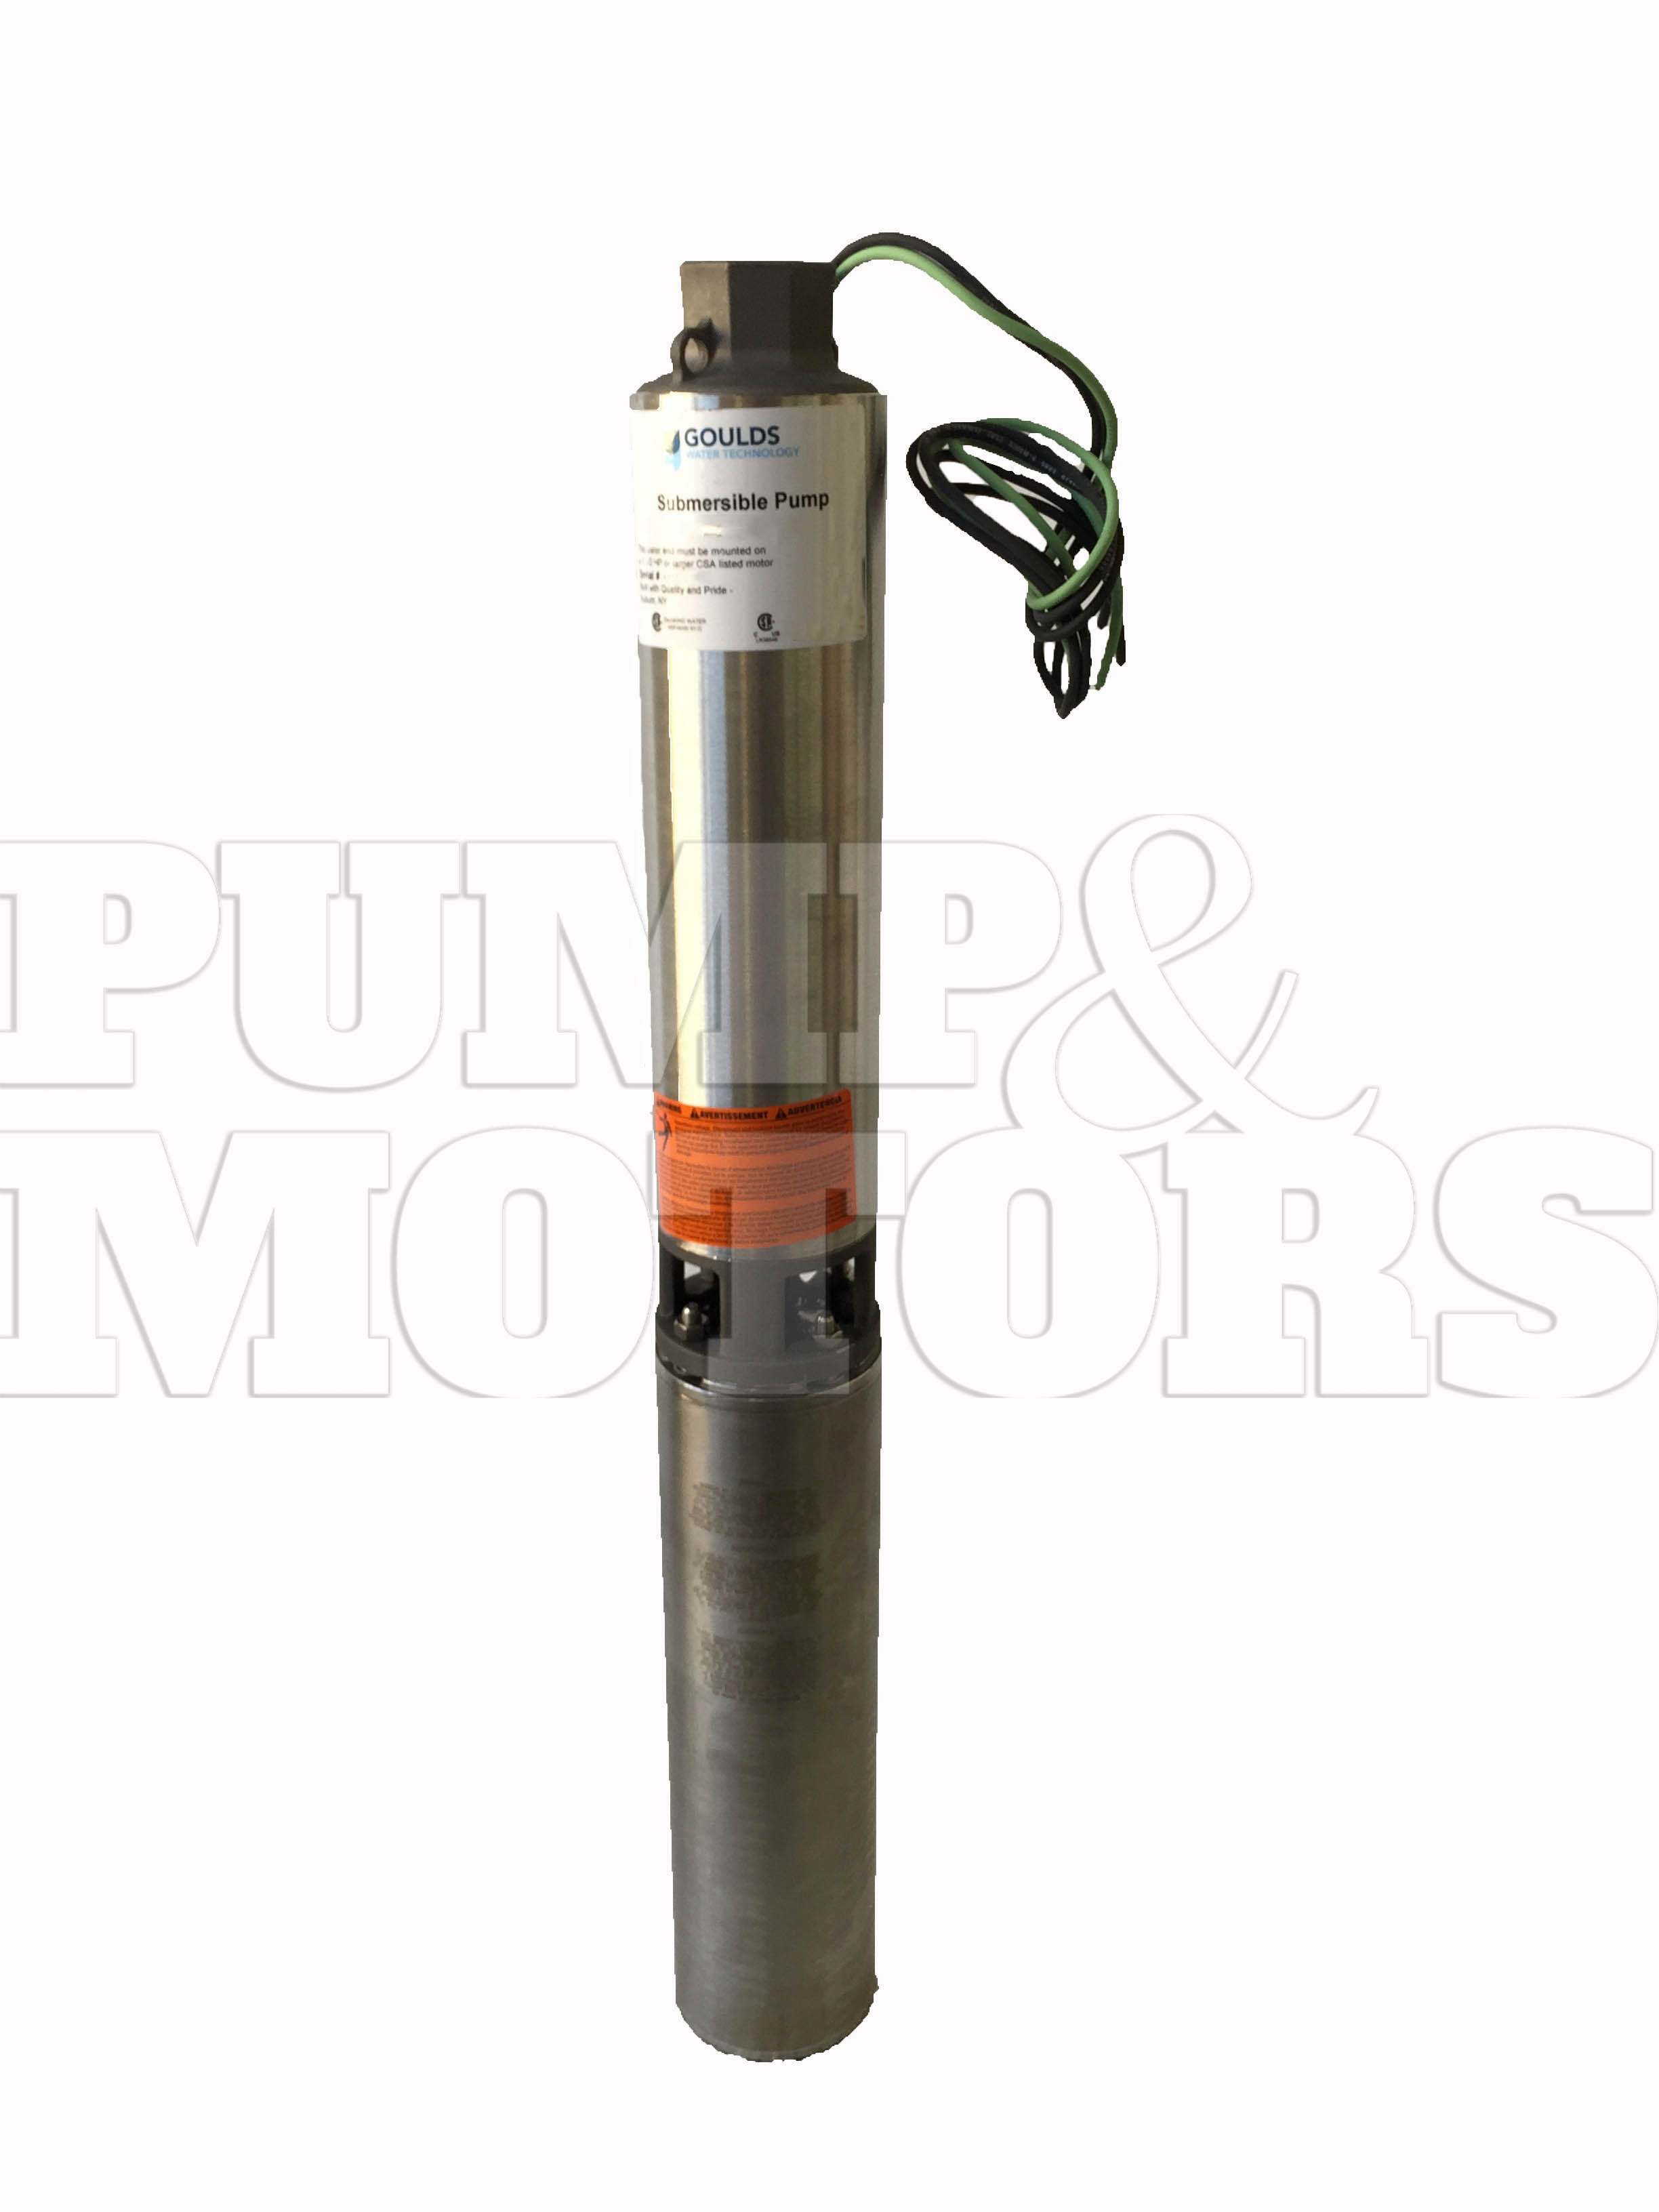 65GS15422C Goulds 65GPM Submersible Water Well Pump 1.5HP